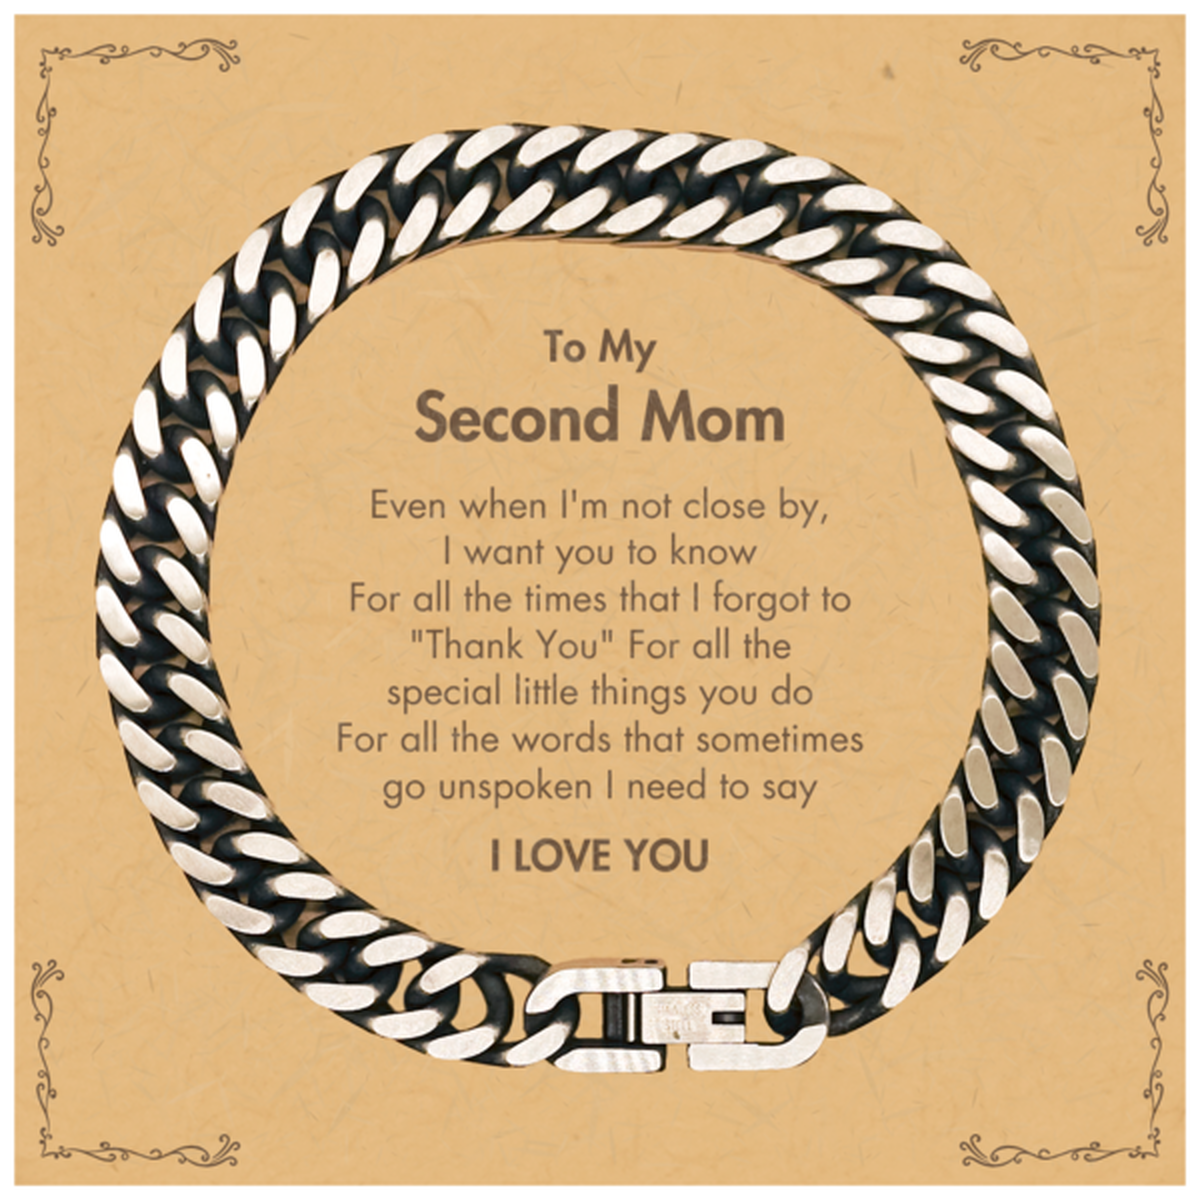 Thank You Gifts for Second Mom, Keepsake Cuban Link Chain Bracelet Gifts for Second Mom Birthday Mother's day Father's Day Second Mom For all the words That sometimes go unspoken I need to say I LOVE YOU